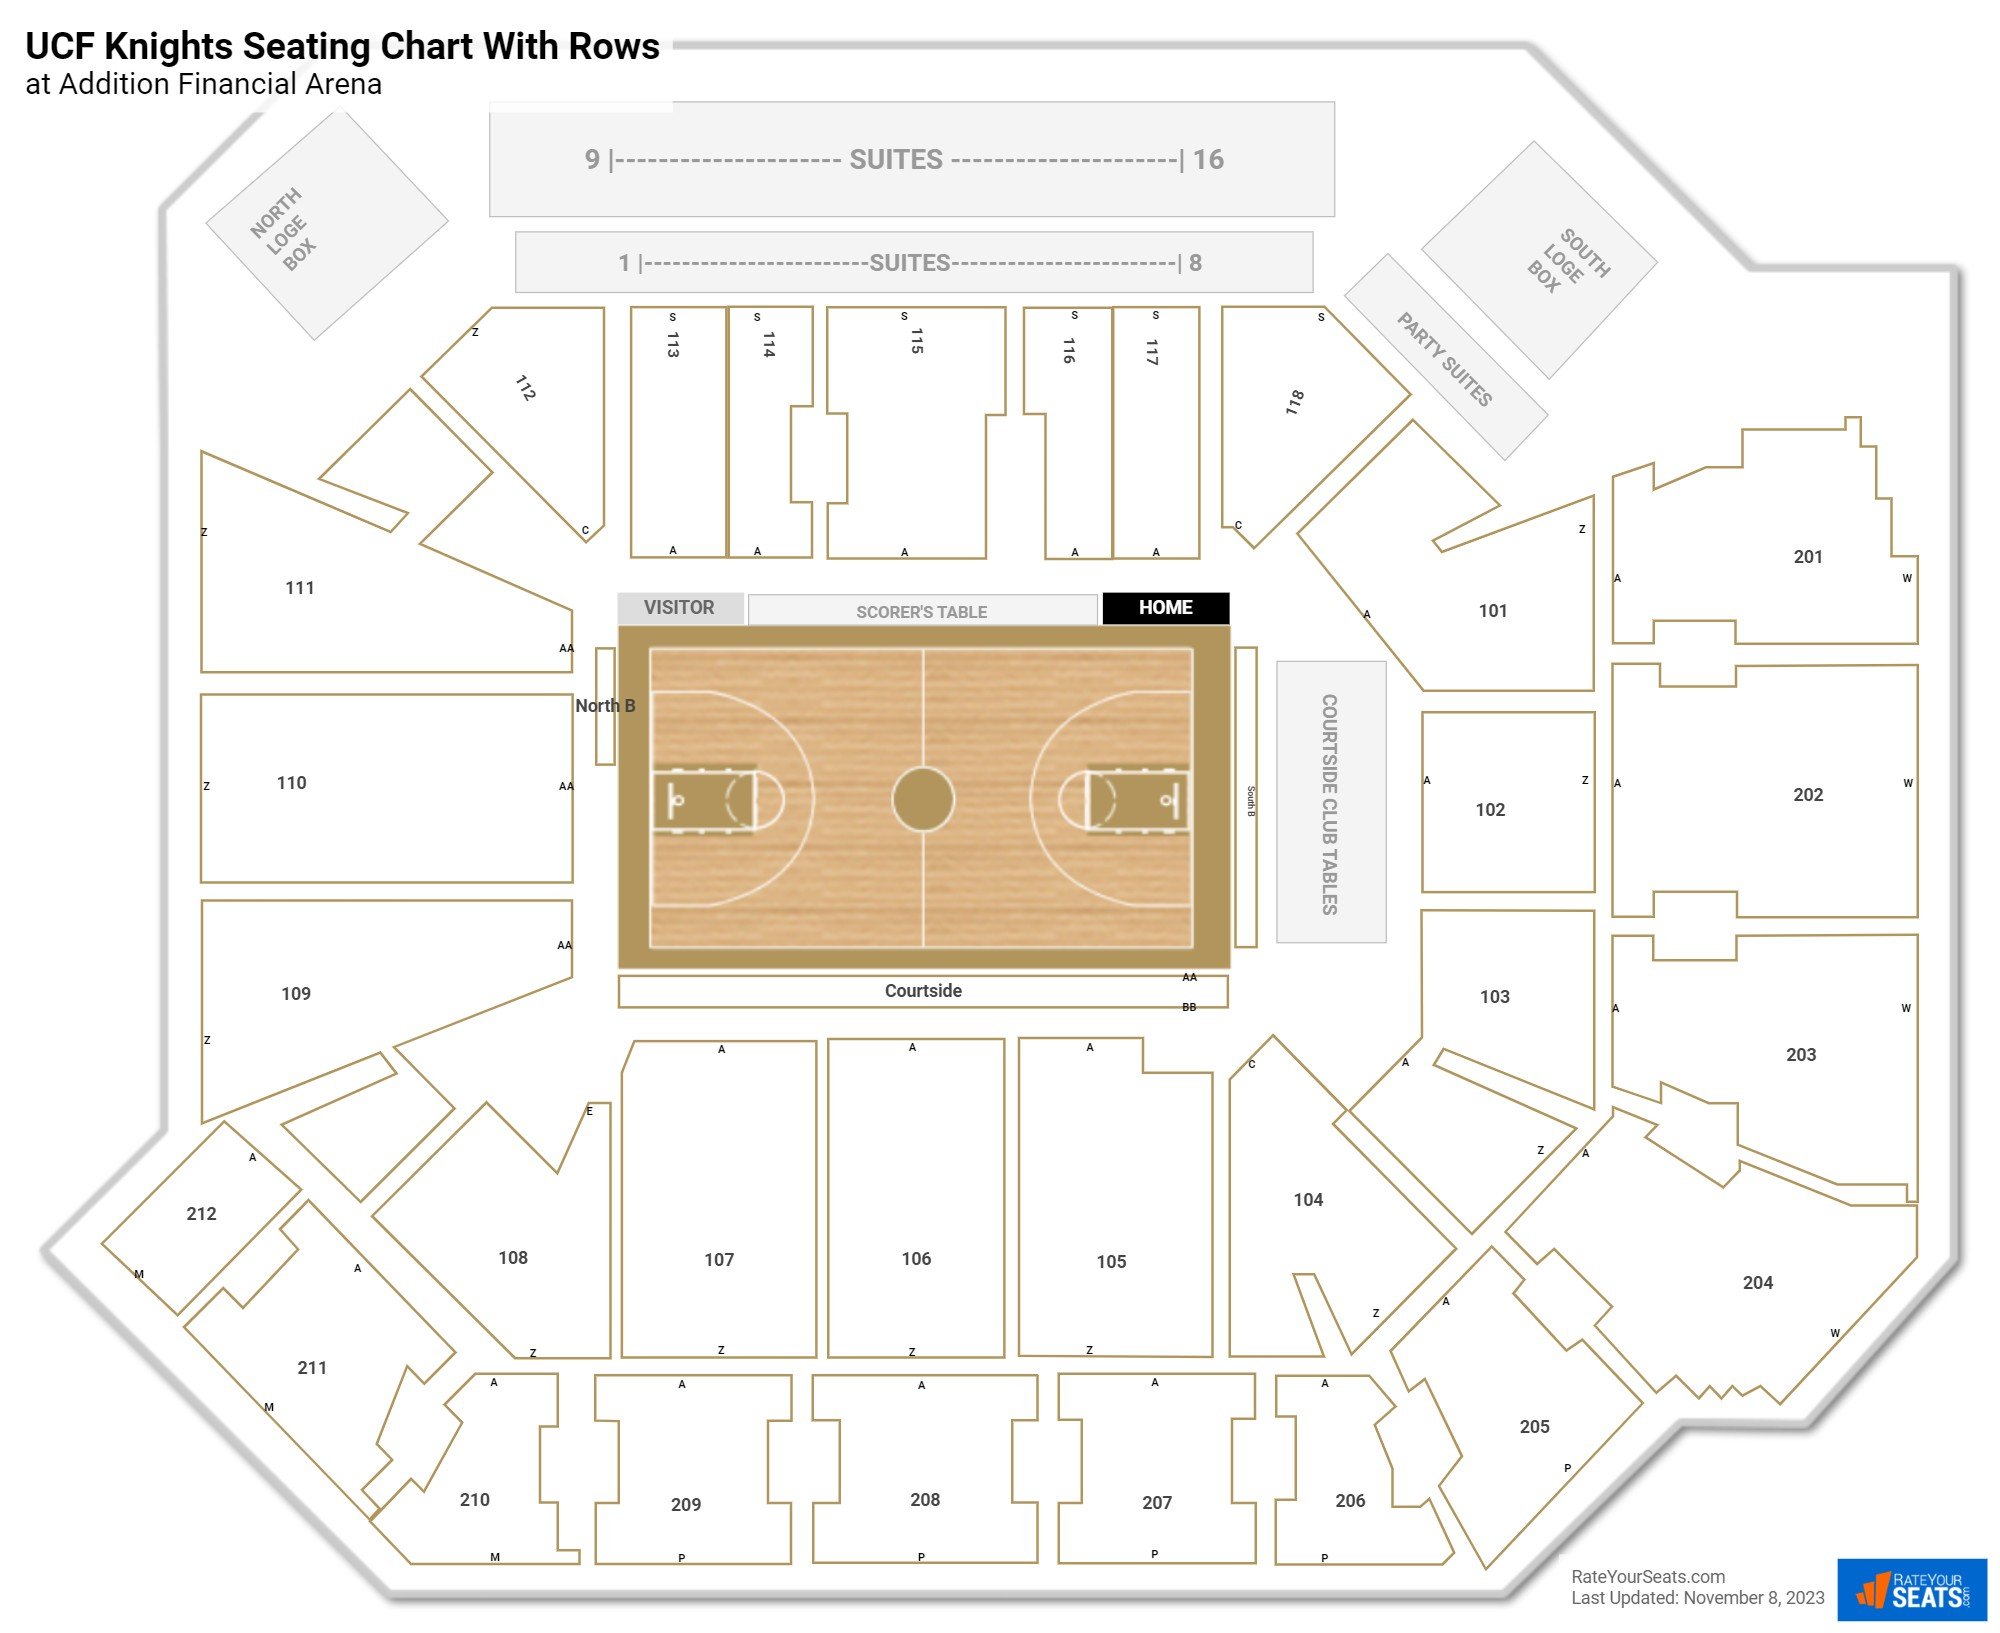 Addition Financial Arena seating chart with row numbers